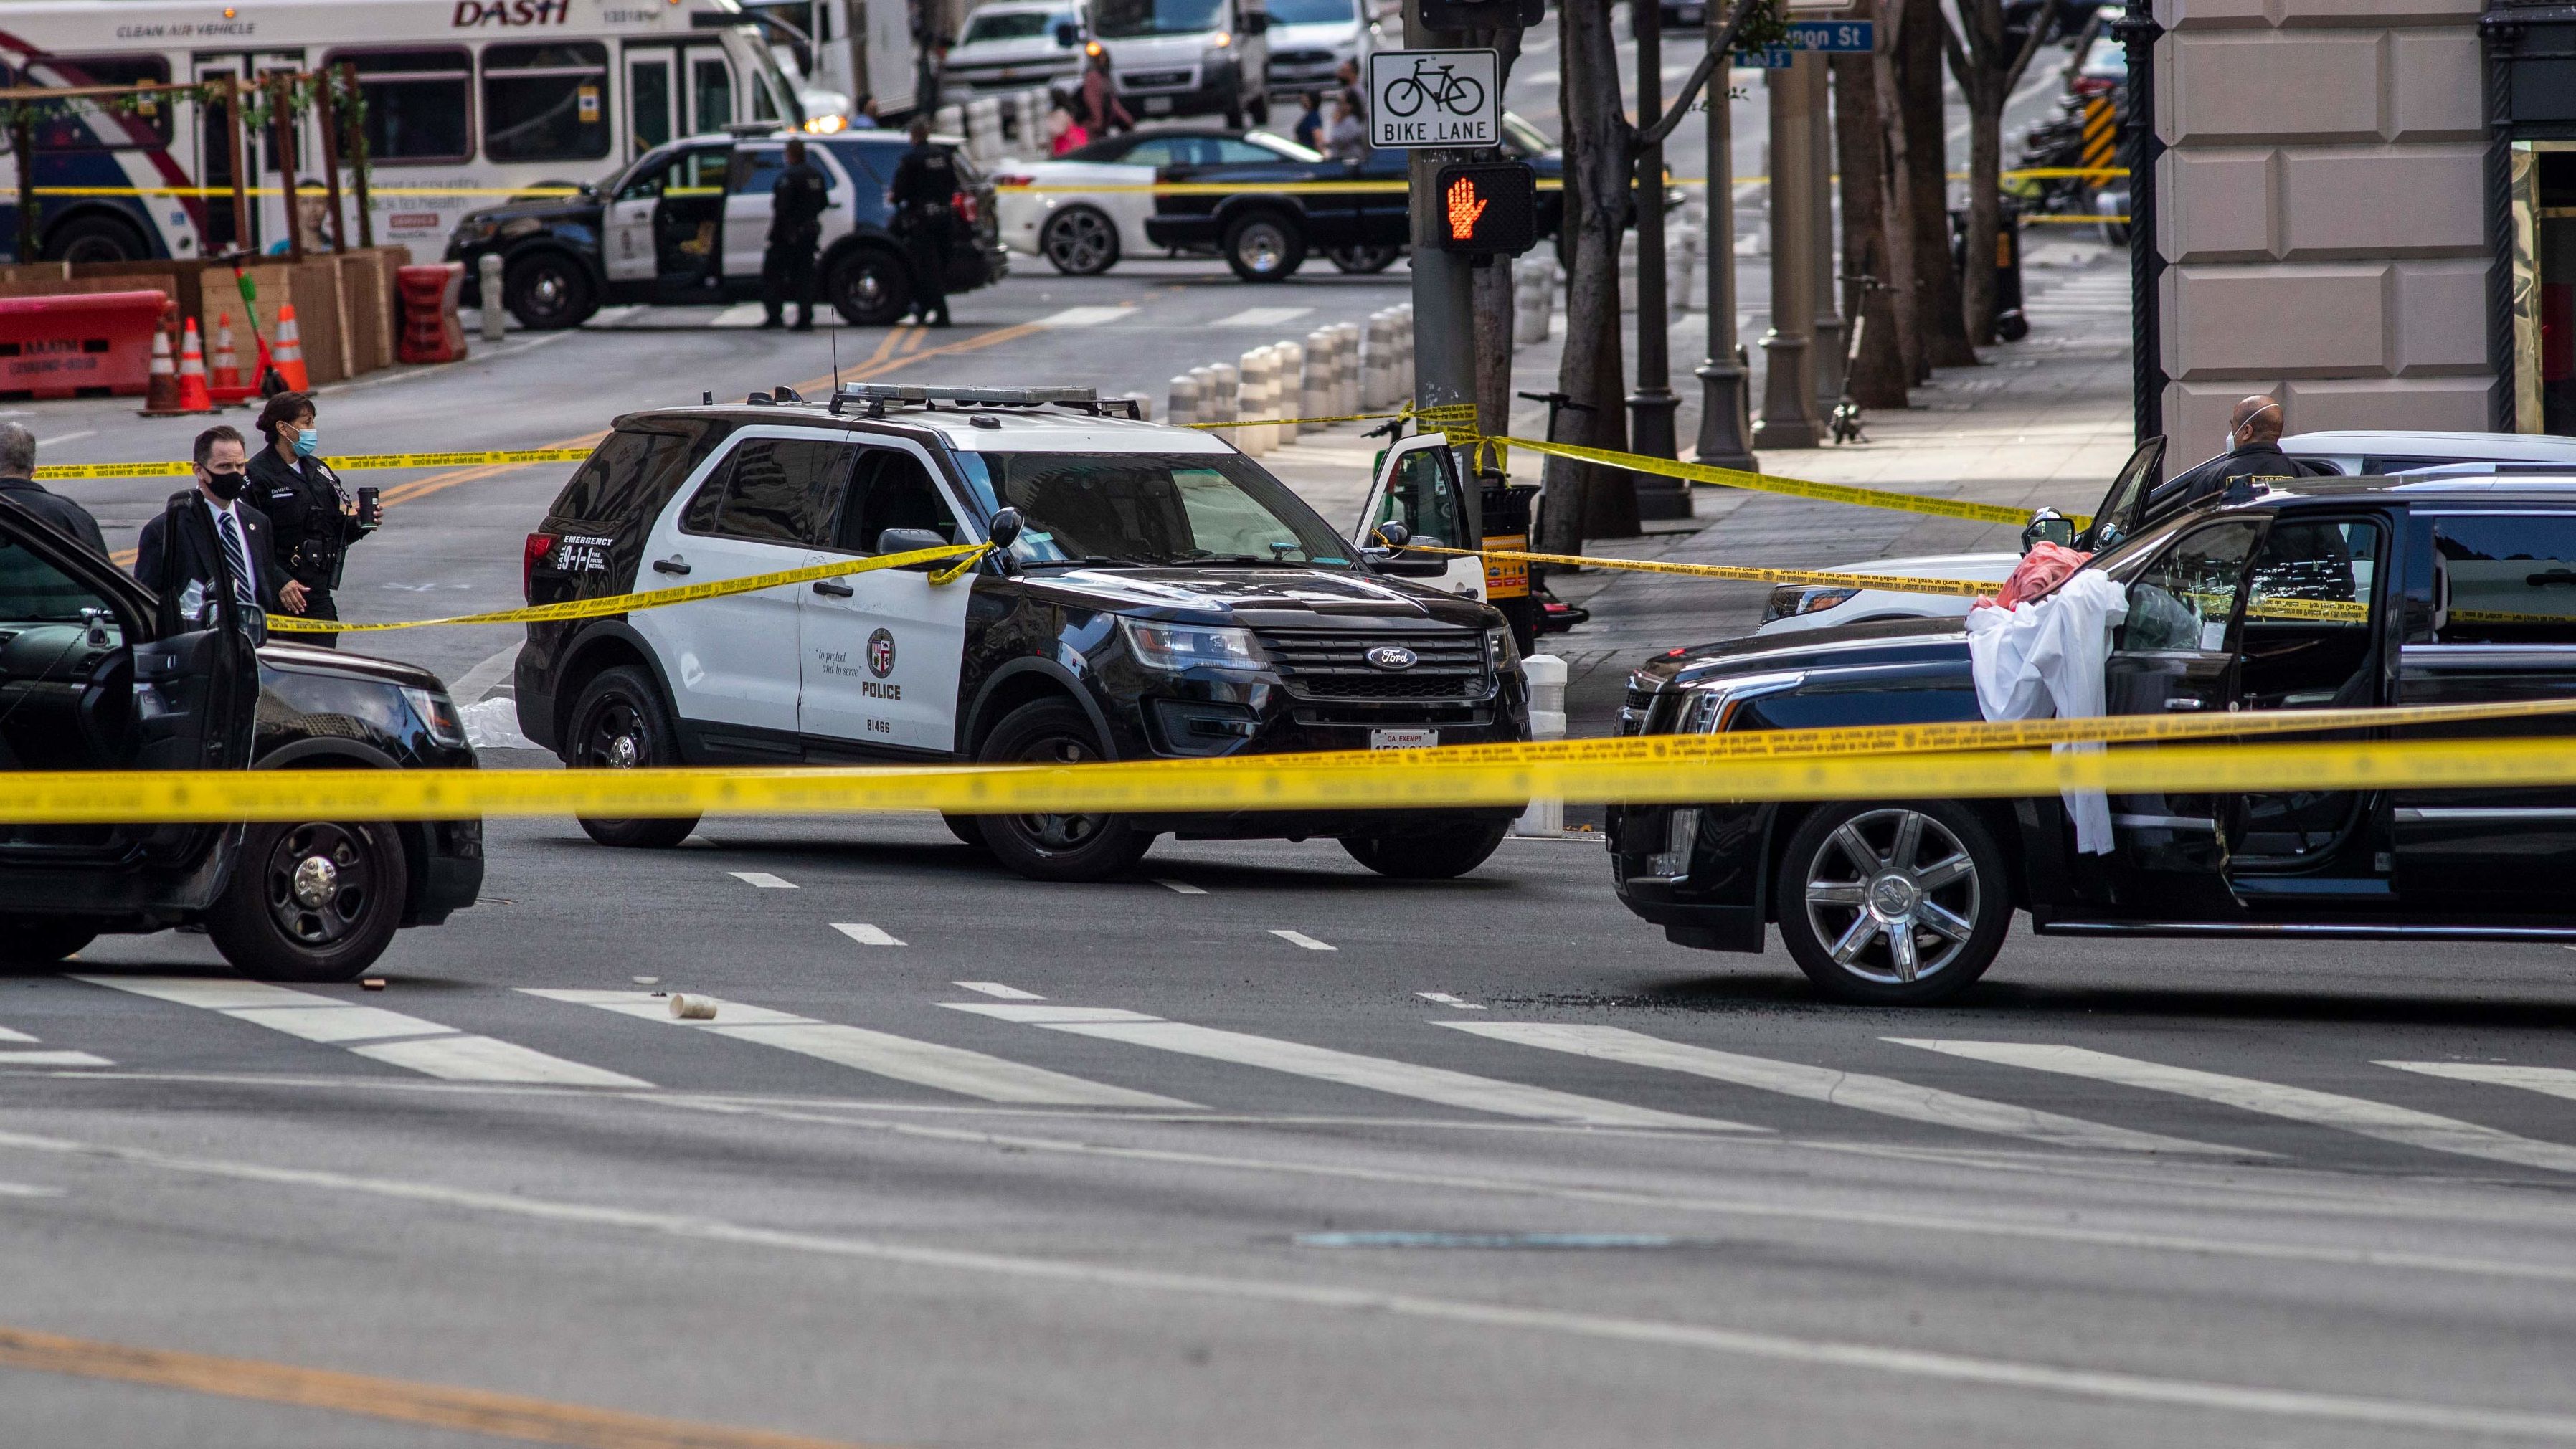 Officers from the Los Angeles Police Department investigate the scene of a shooting on April 27, 2021. Los Angeles was one of the cities named in the CCJ report published Monday.